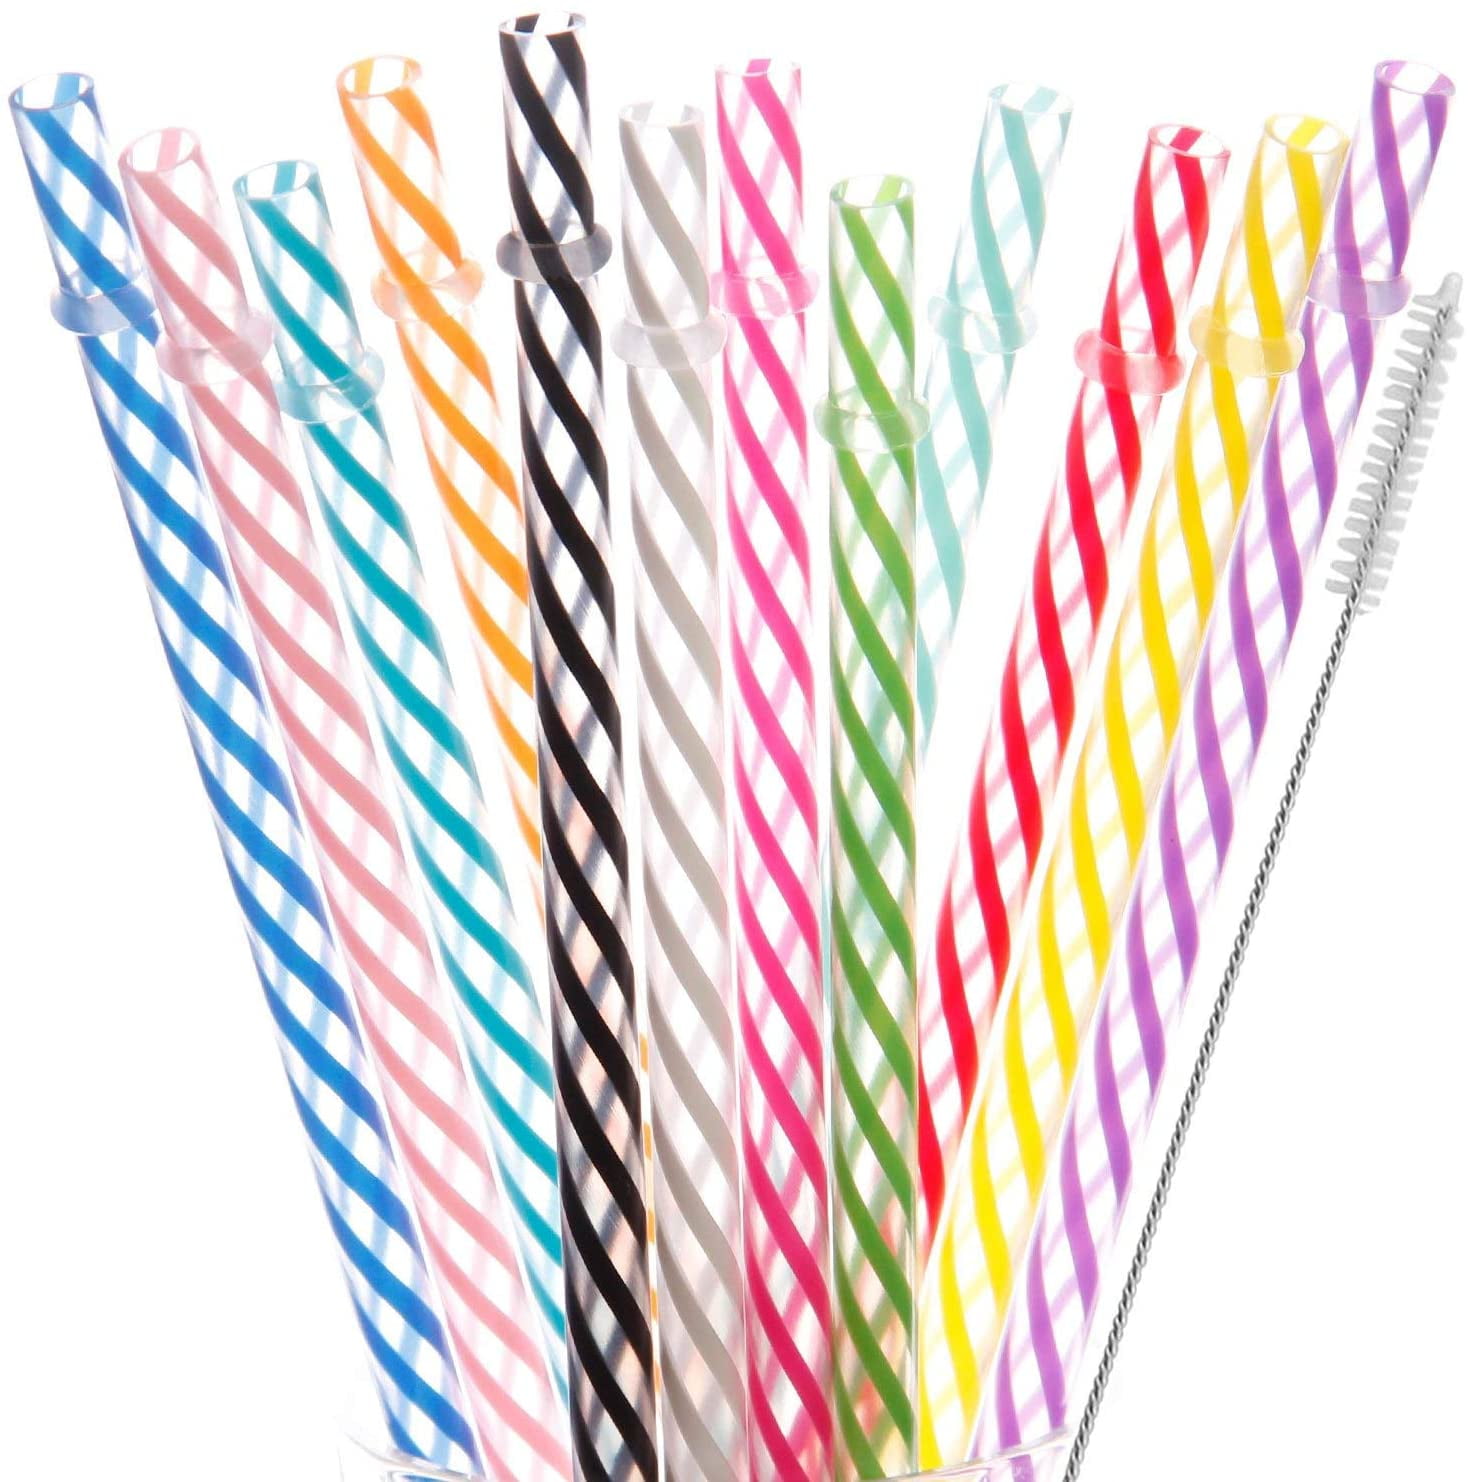 11 Inch Reusable Plastic Straws, Replacement Drinking Straws for 24 oz-40  oz /Tumblers,Dishwasher safe,Set of 12 with Cleaning Brush(6color,11inch)